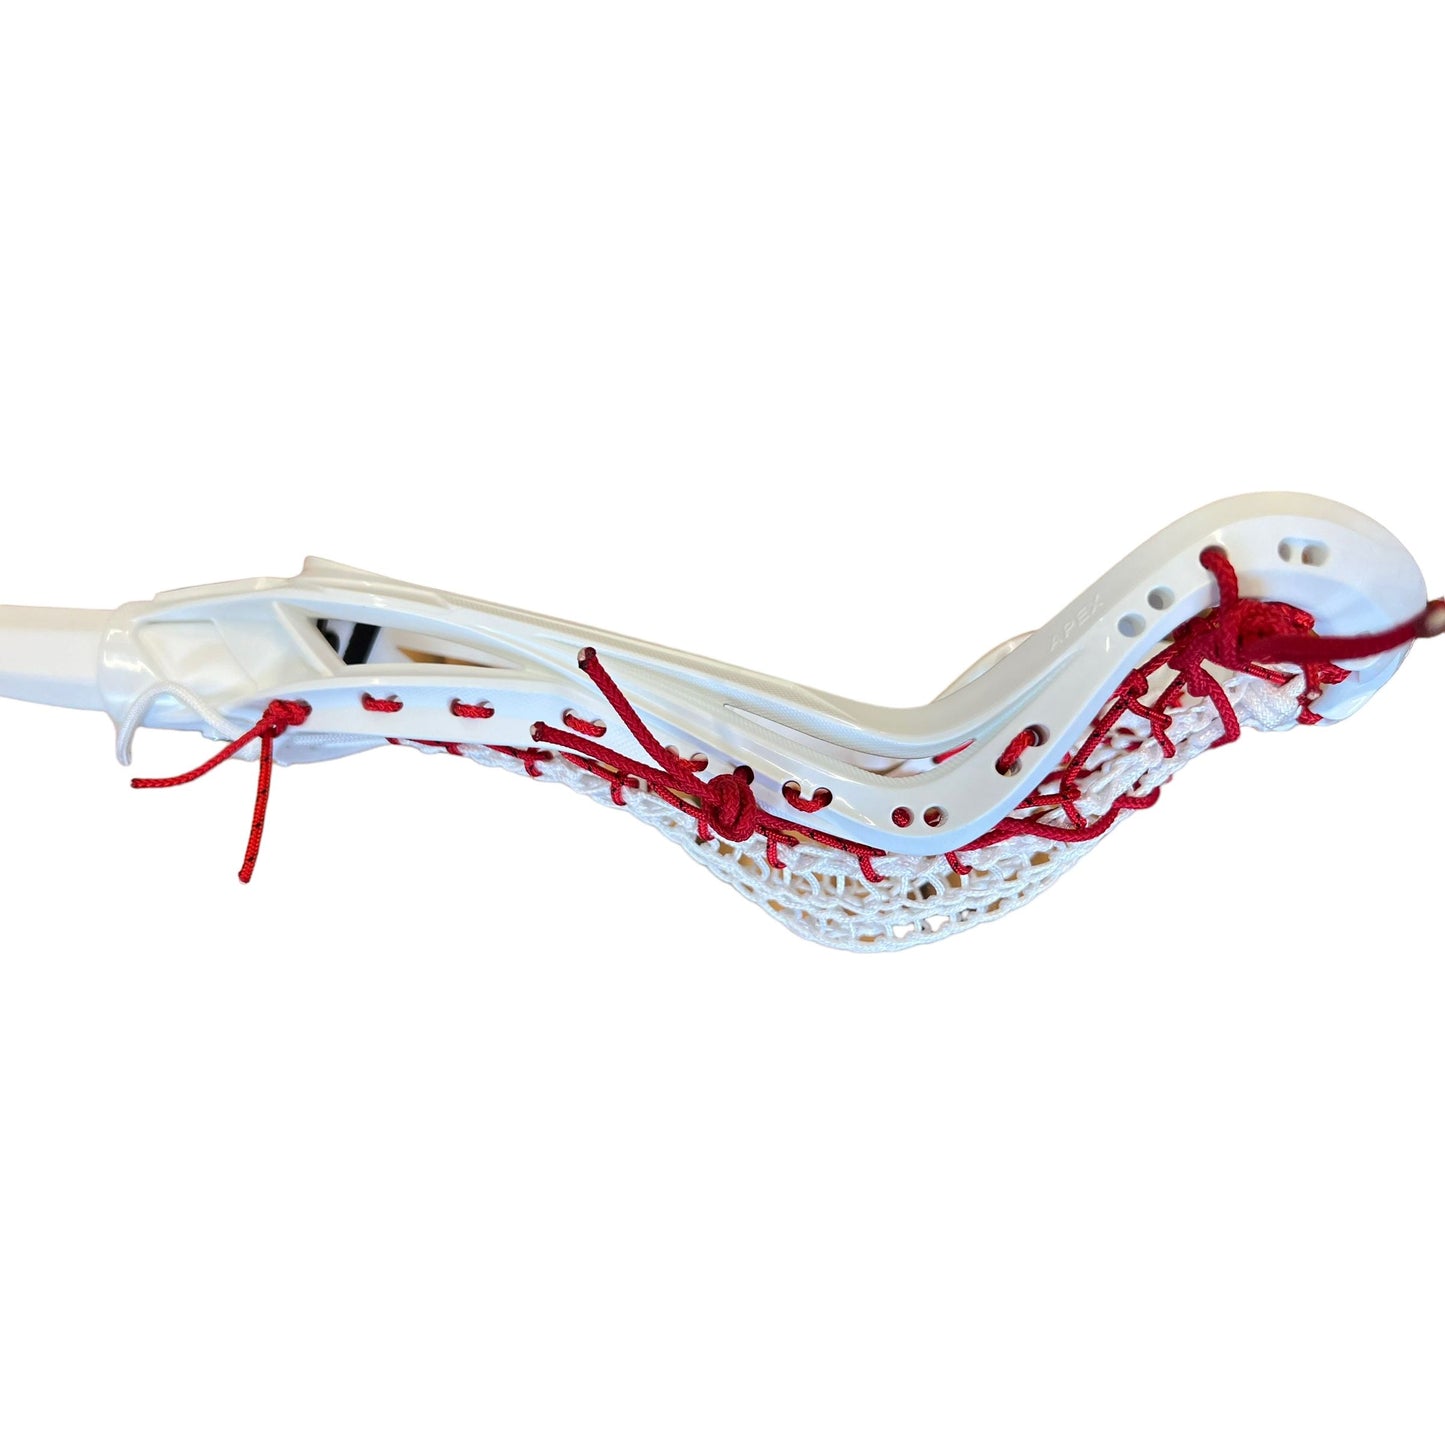 Custom Strung Gait Apex Complete Women's Lacrosse Stick with Armor Mesh Valkyrie Pocket White/Red